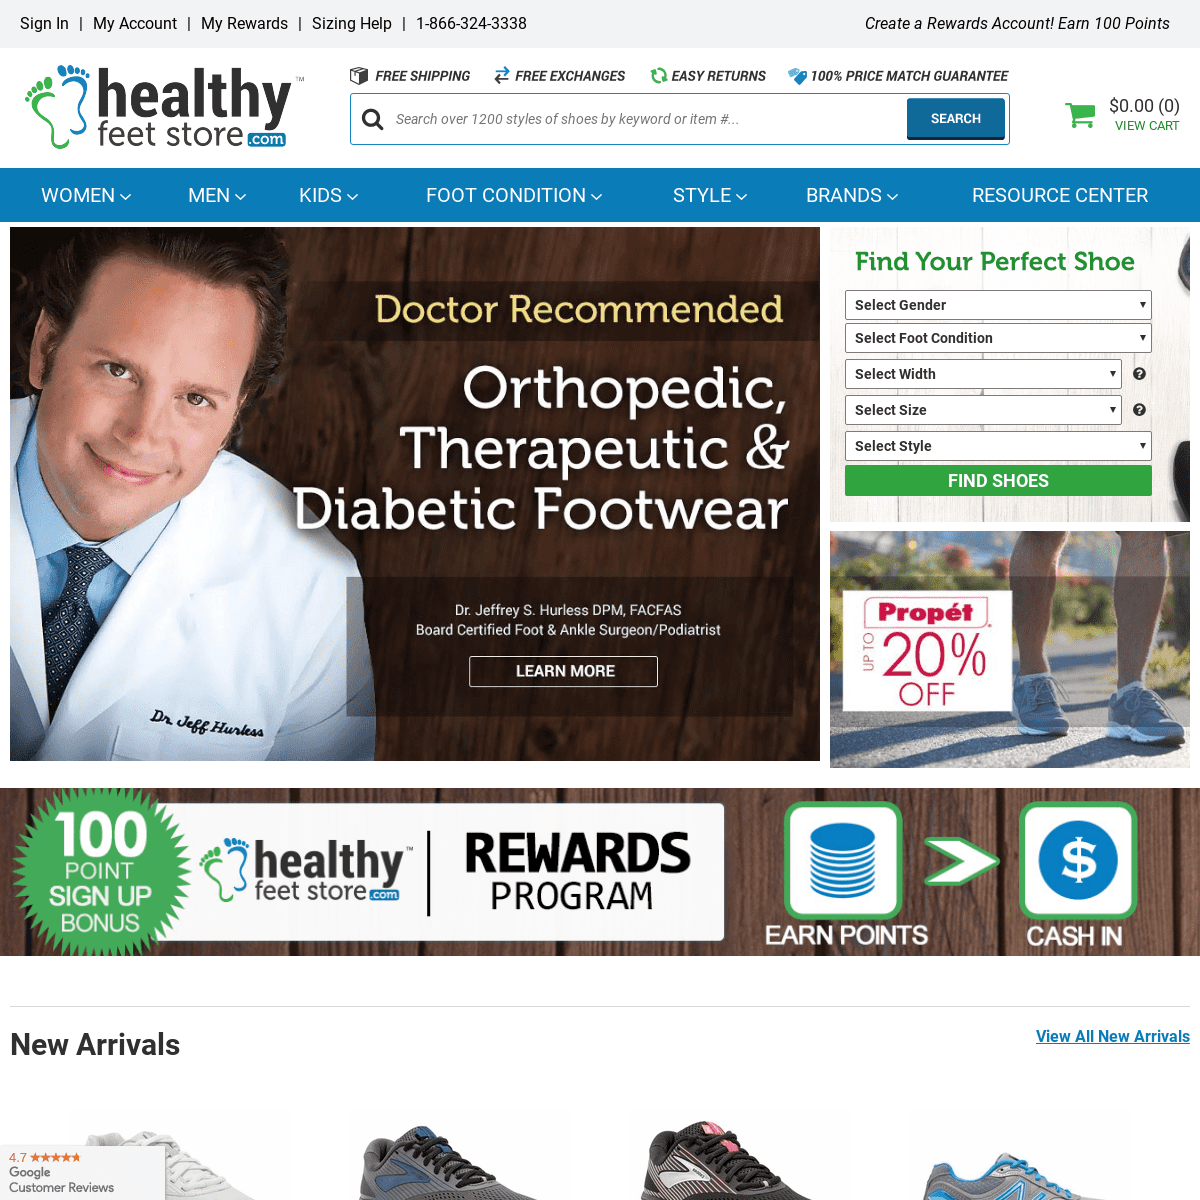 A complete backup of healthyfeetstore.com